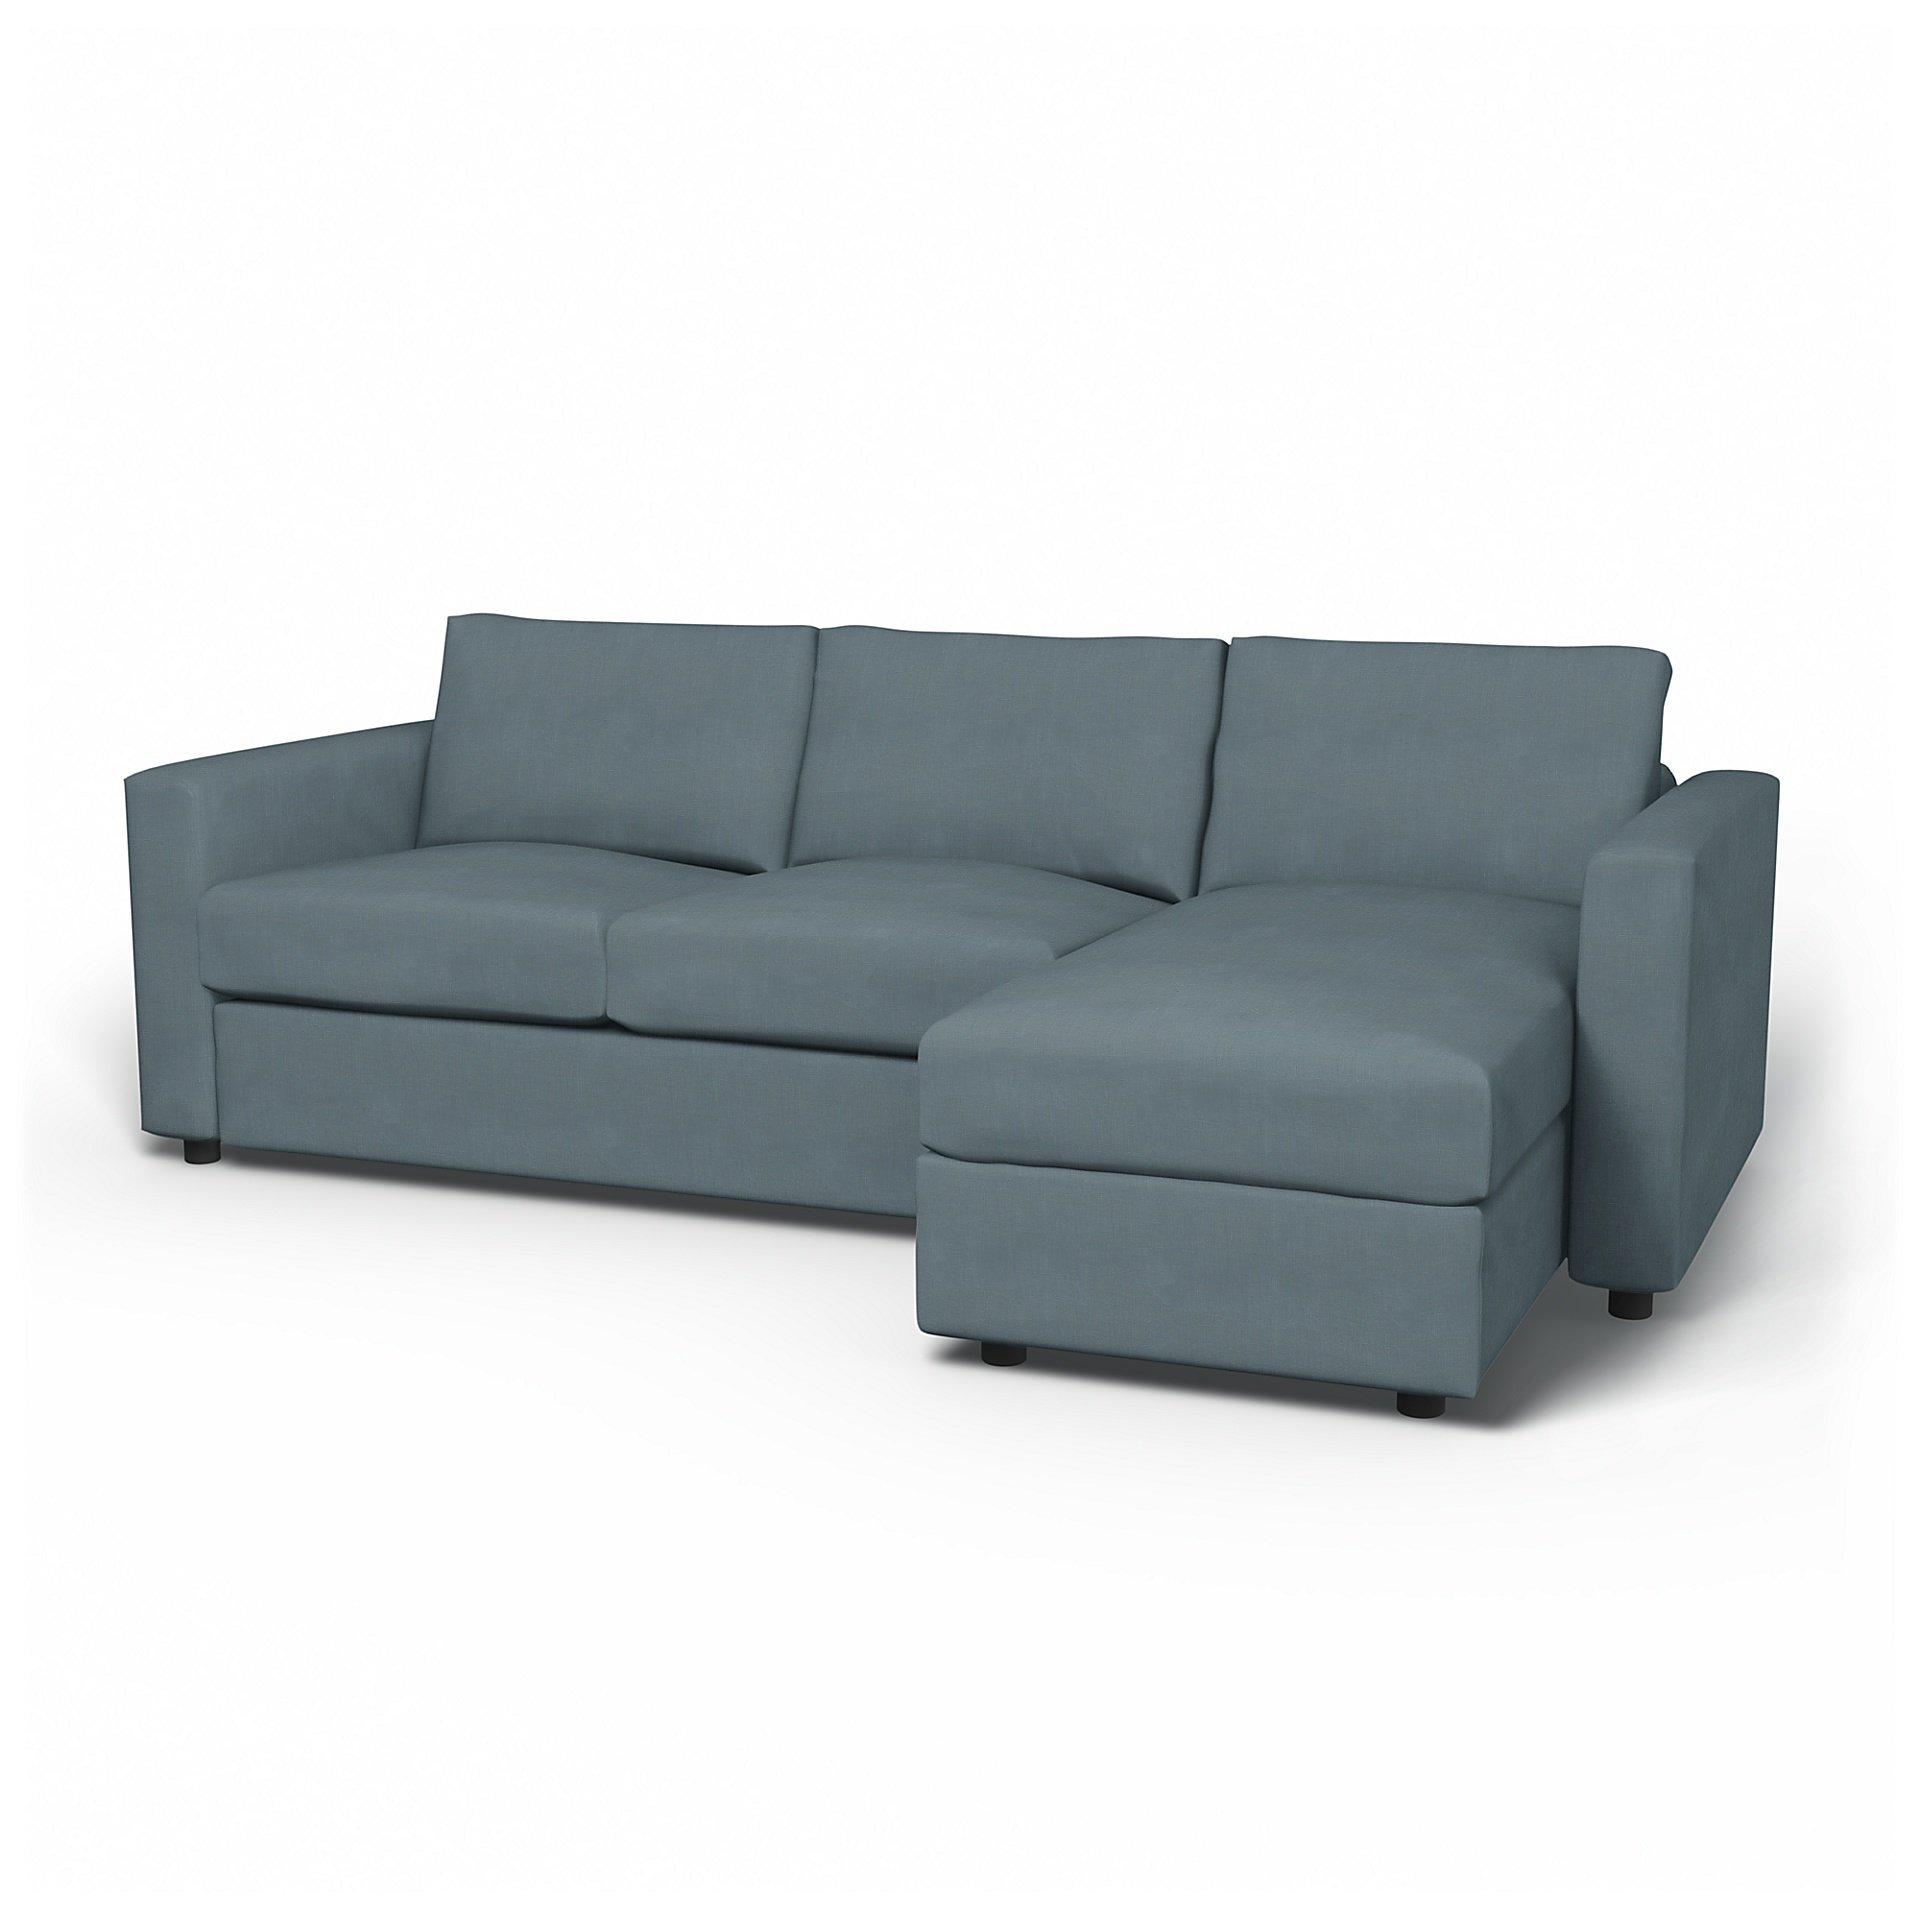 IKEA - Vimle 2 Seater Sofa with Chaise Cover, Dusk, Linen - Bemz